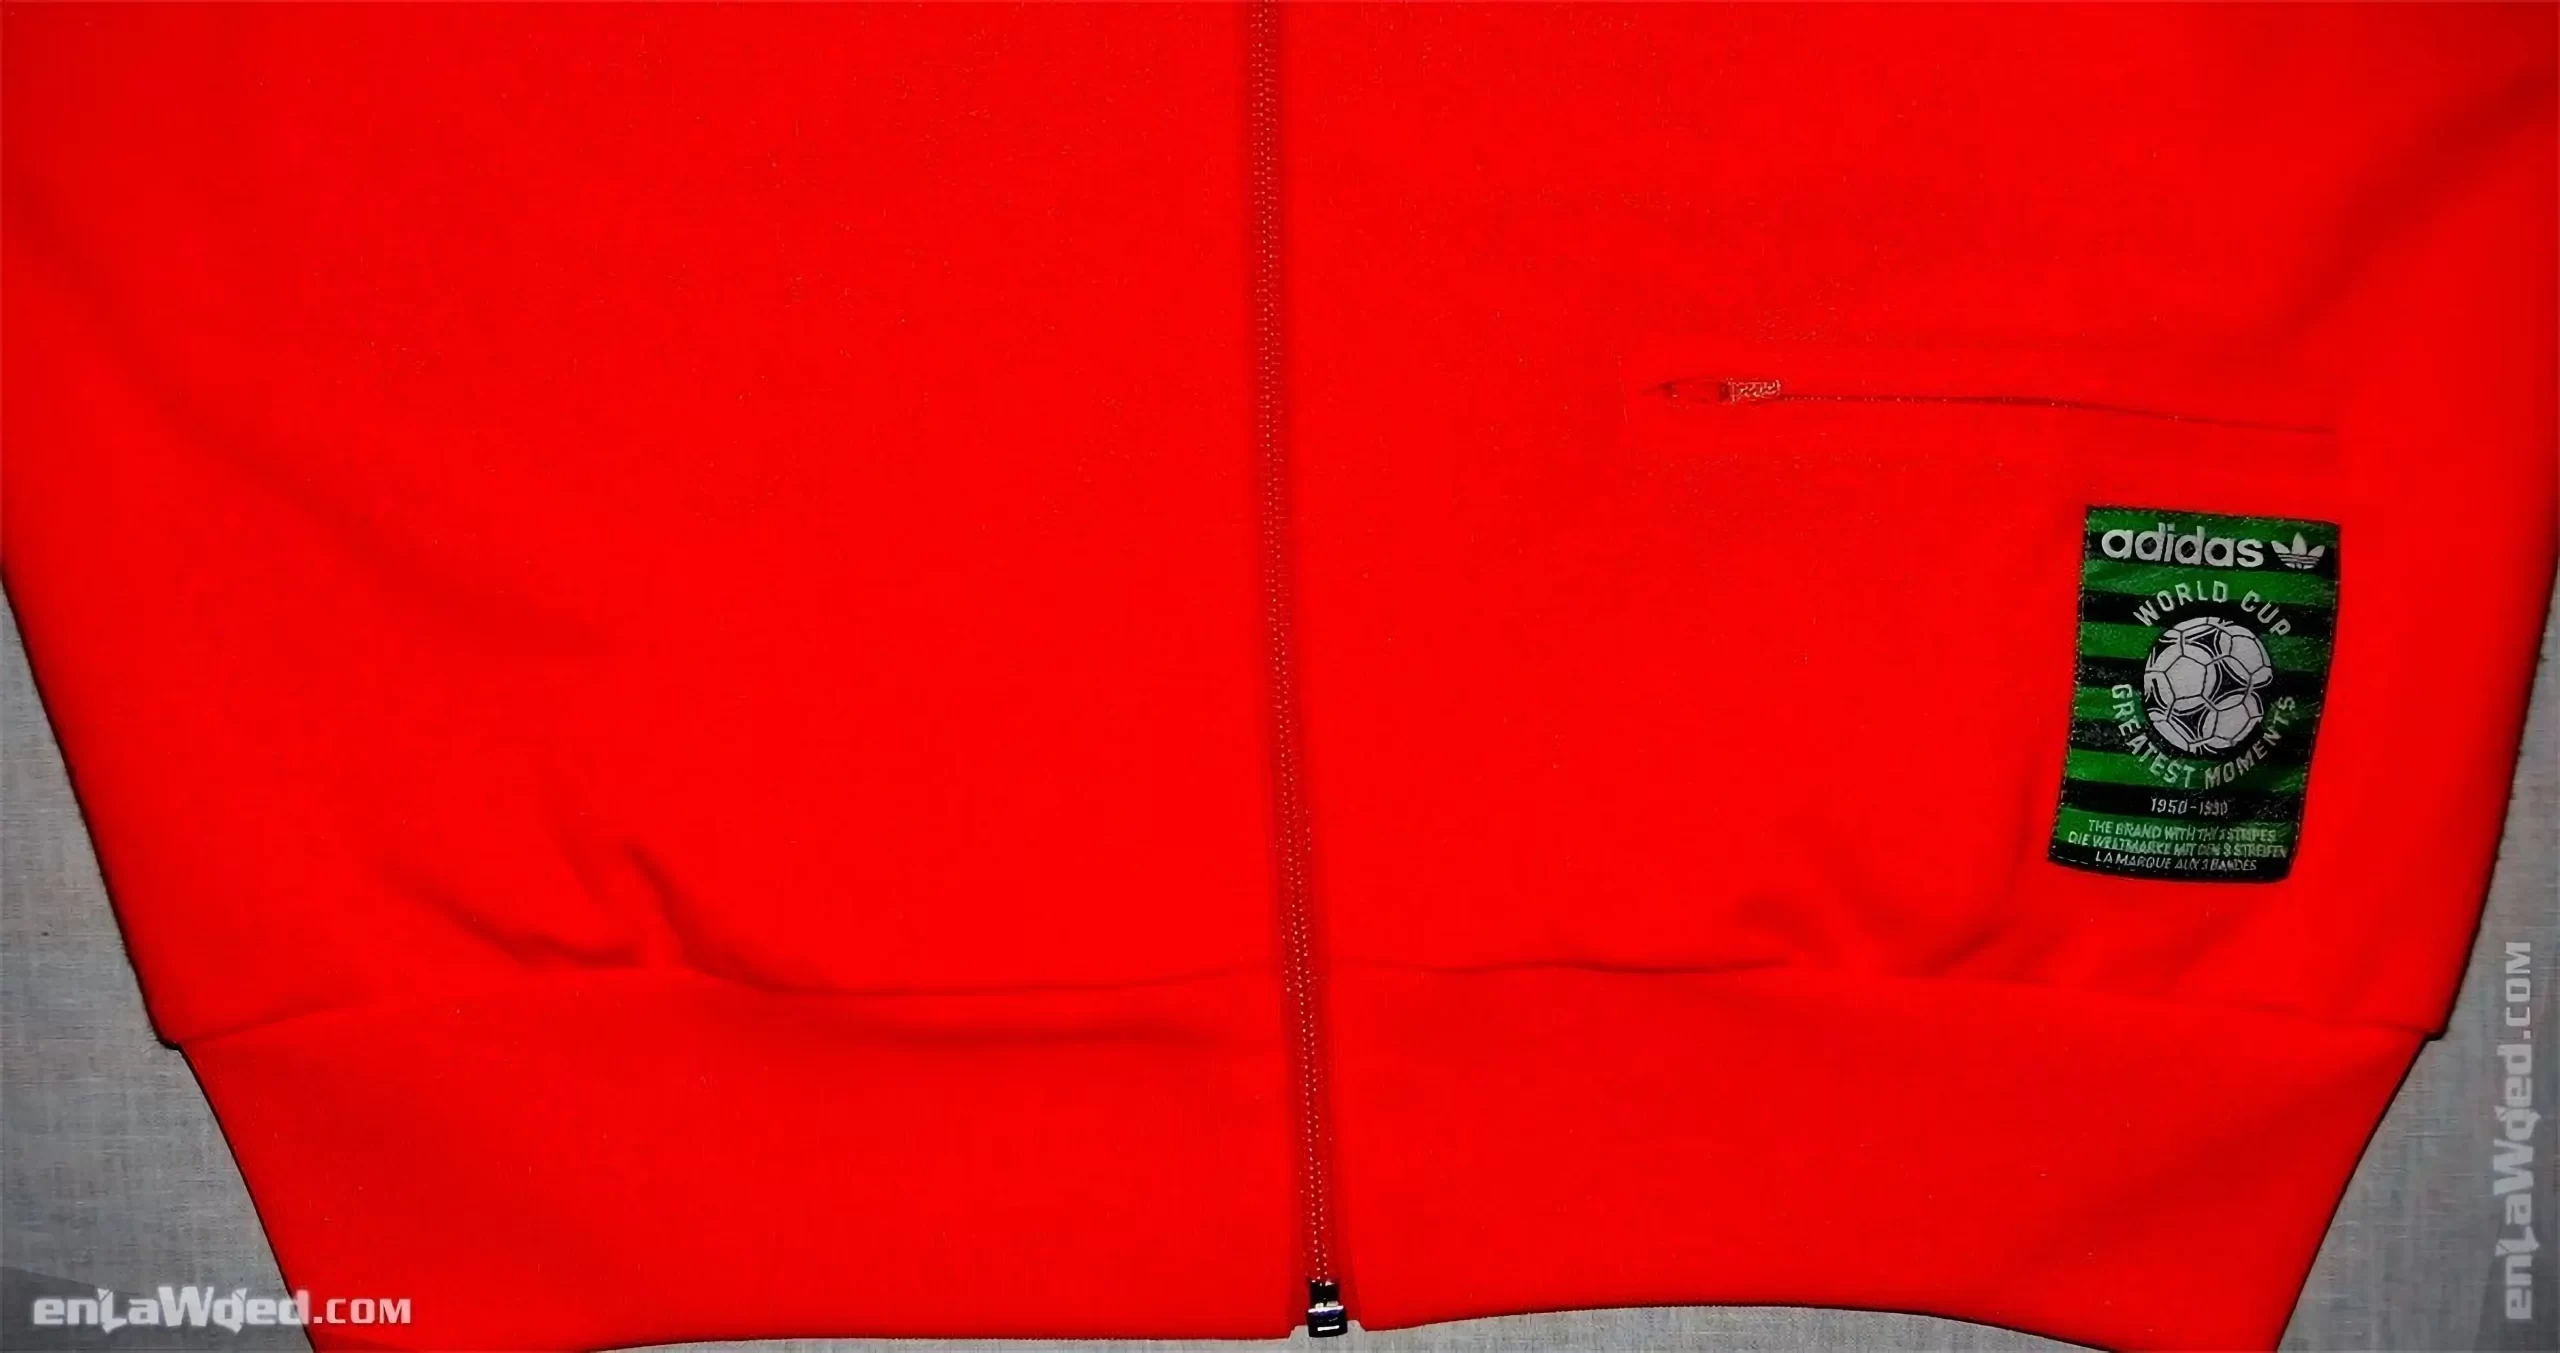 8th interior view of the Adidas Originals Netherlands 1974 Track Top